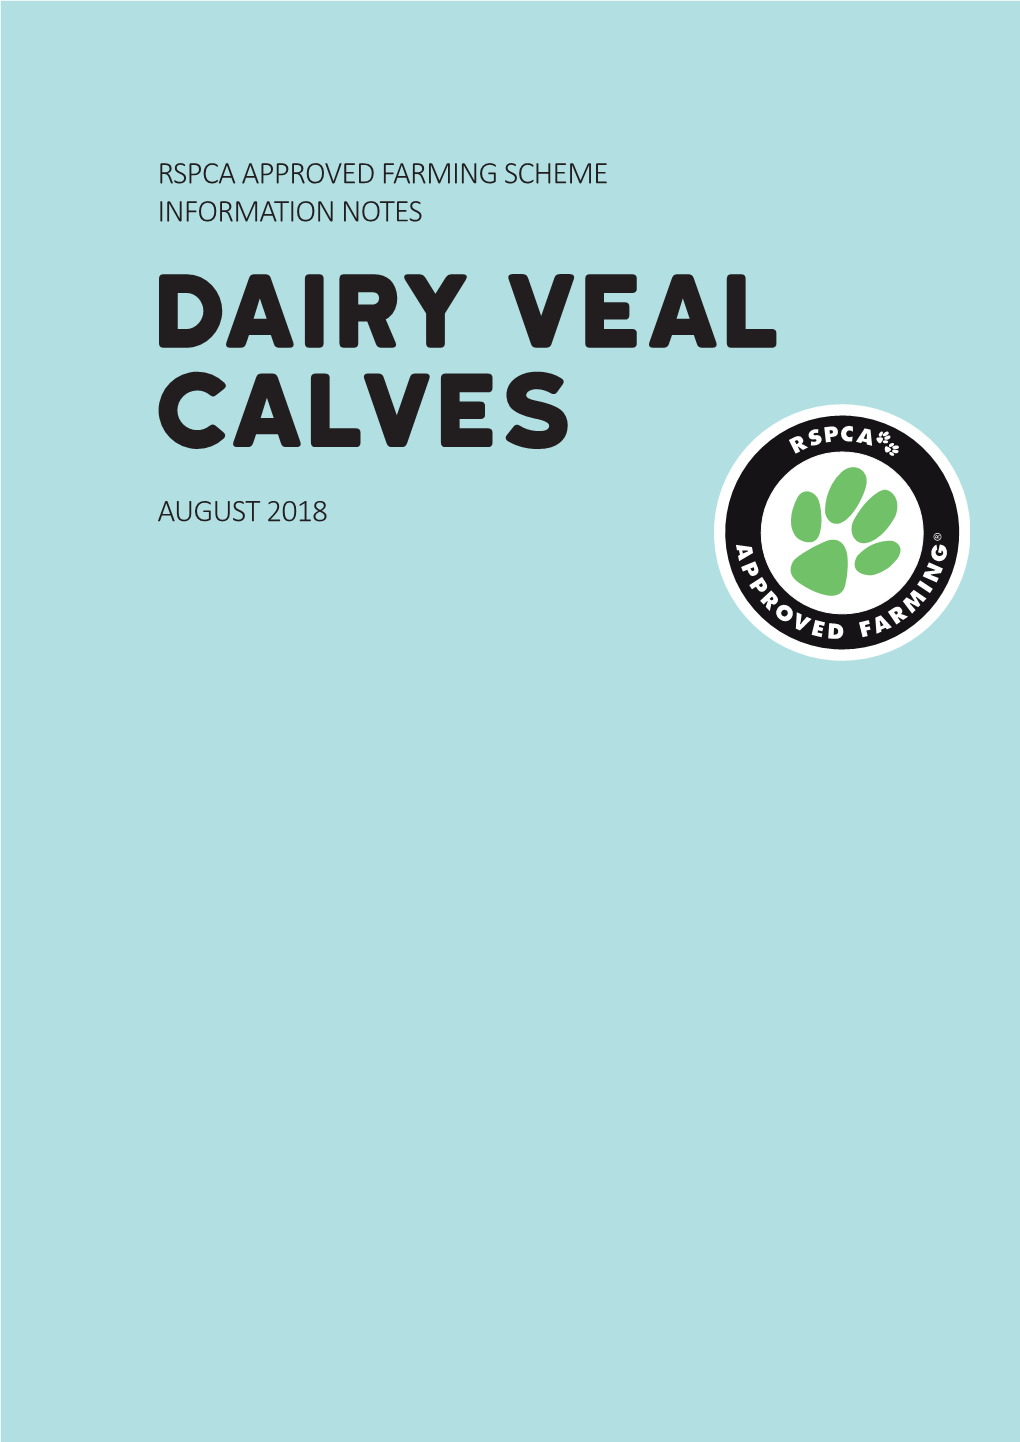 Dairy Veal Calves AUGUST 2018 RSPCA APPROVED FARMING SCHEME INFORMATION NOTES Dairy Veal Calves AUGUST 2018